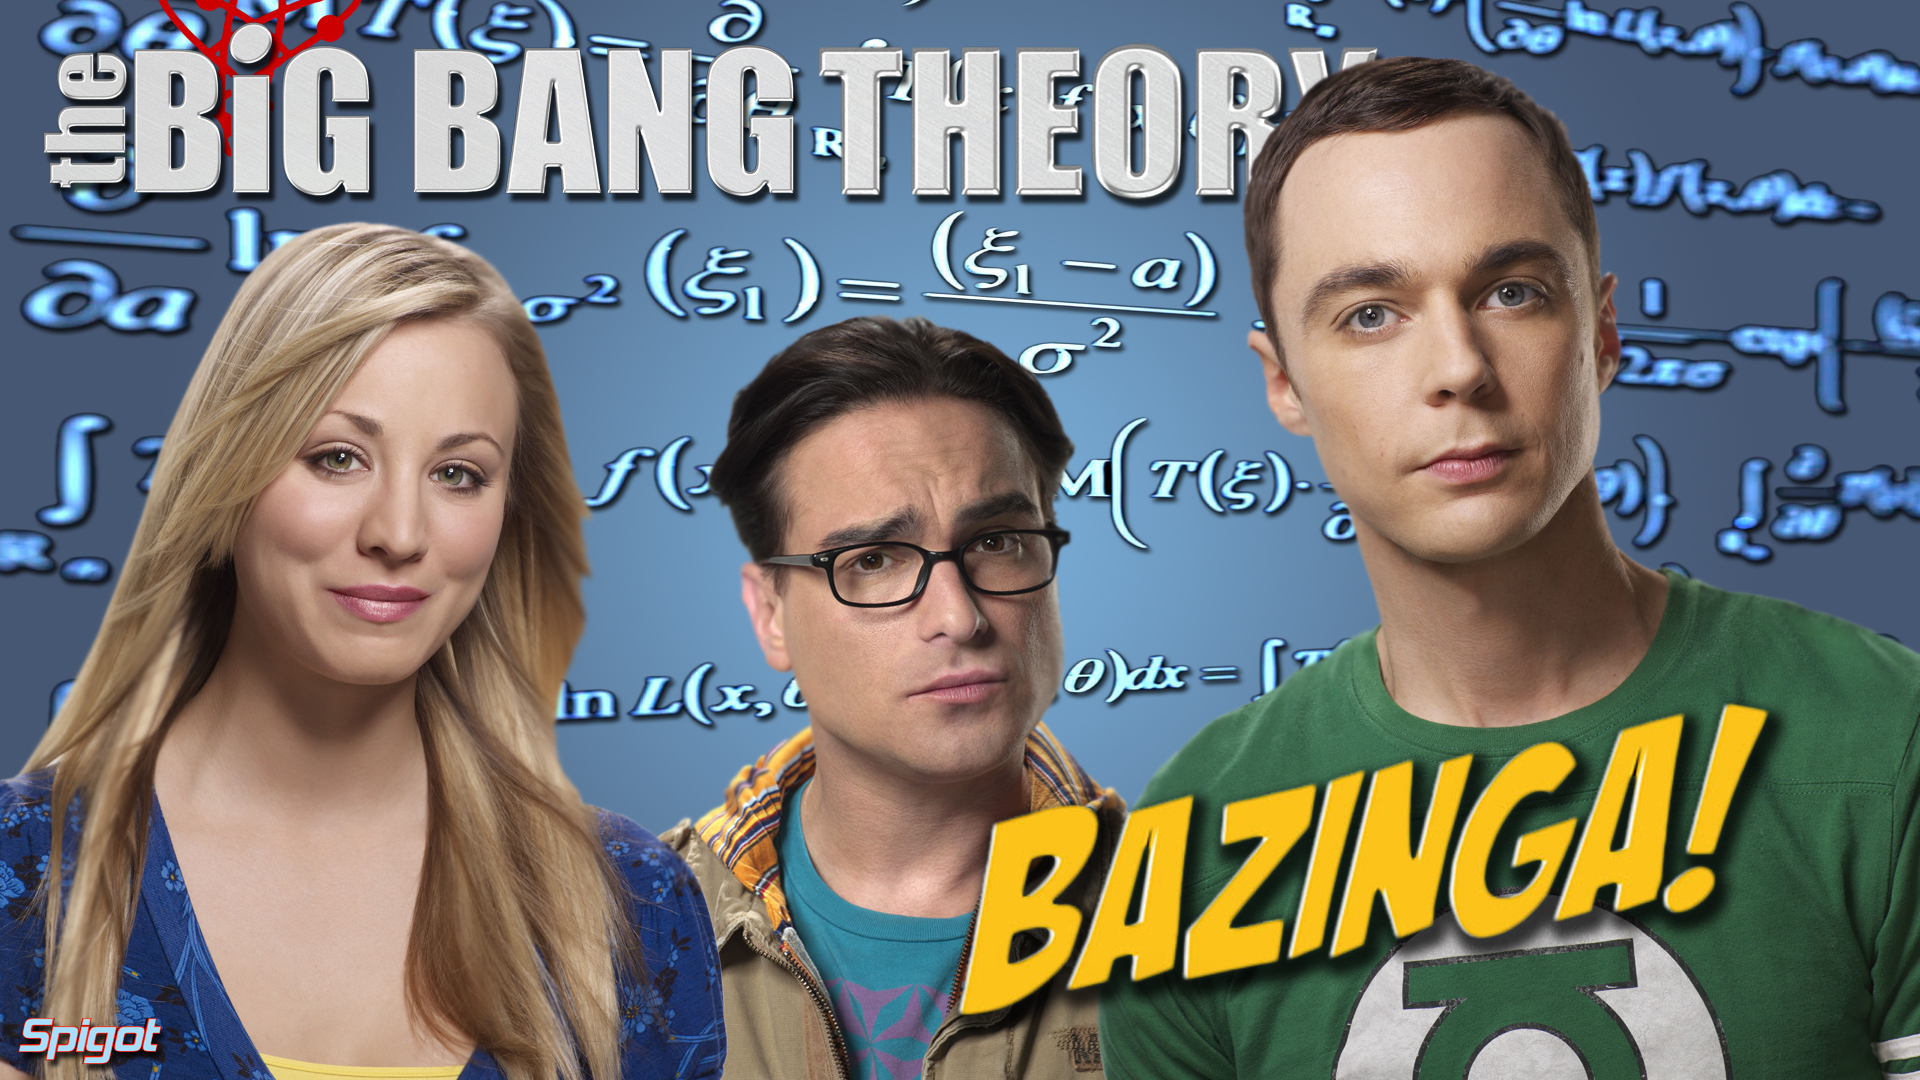 130+ The Big Bang Theory HD Wallpapers and Backgrounds